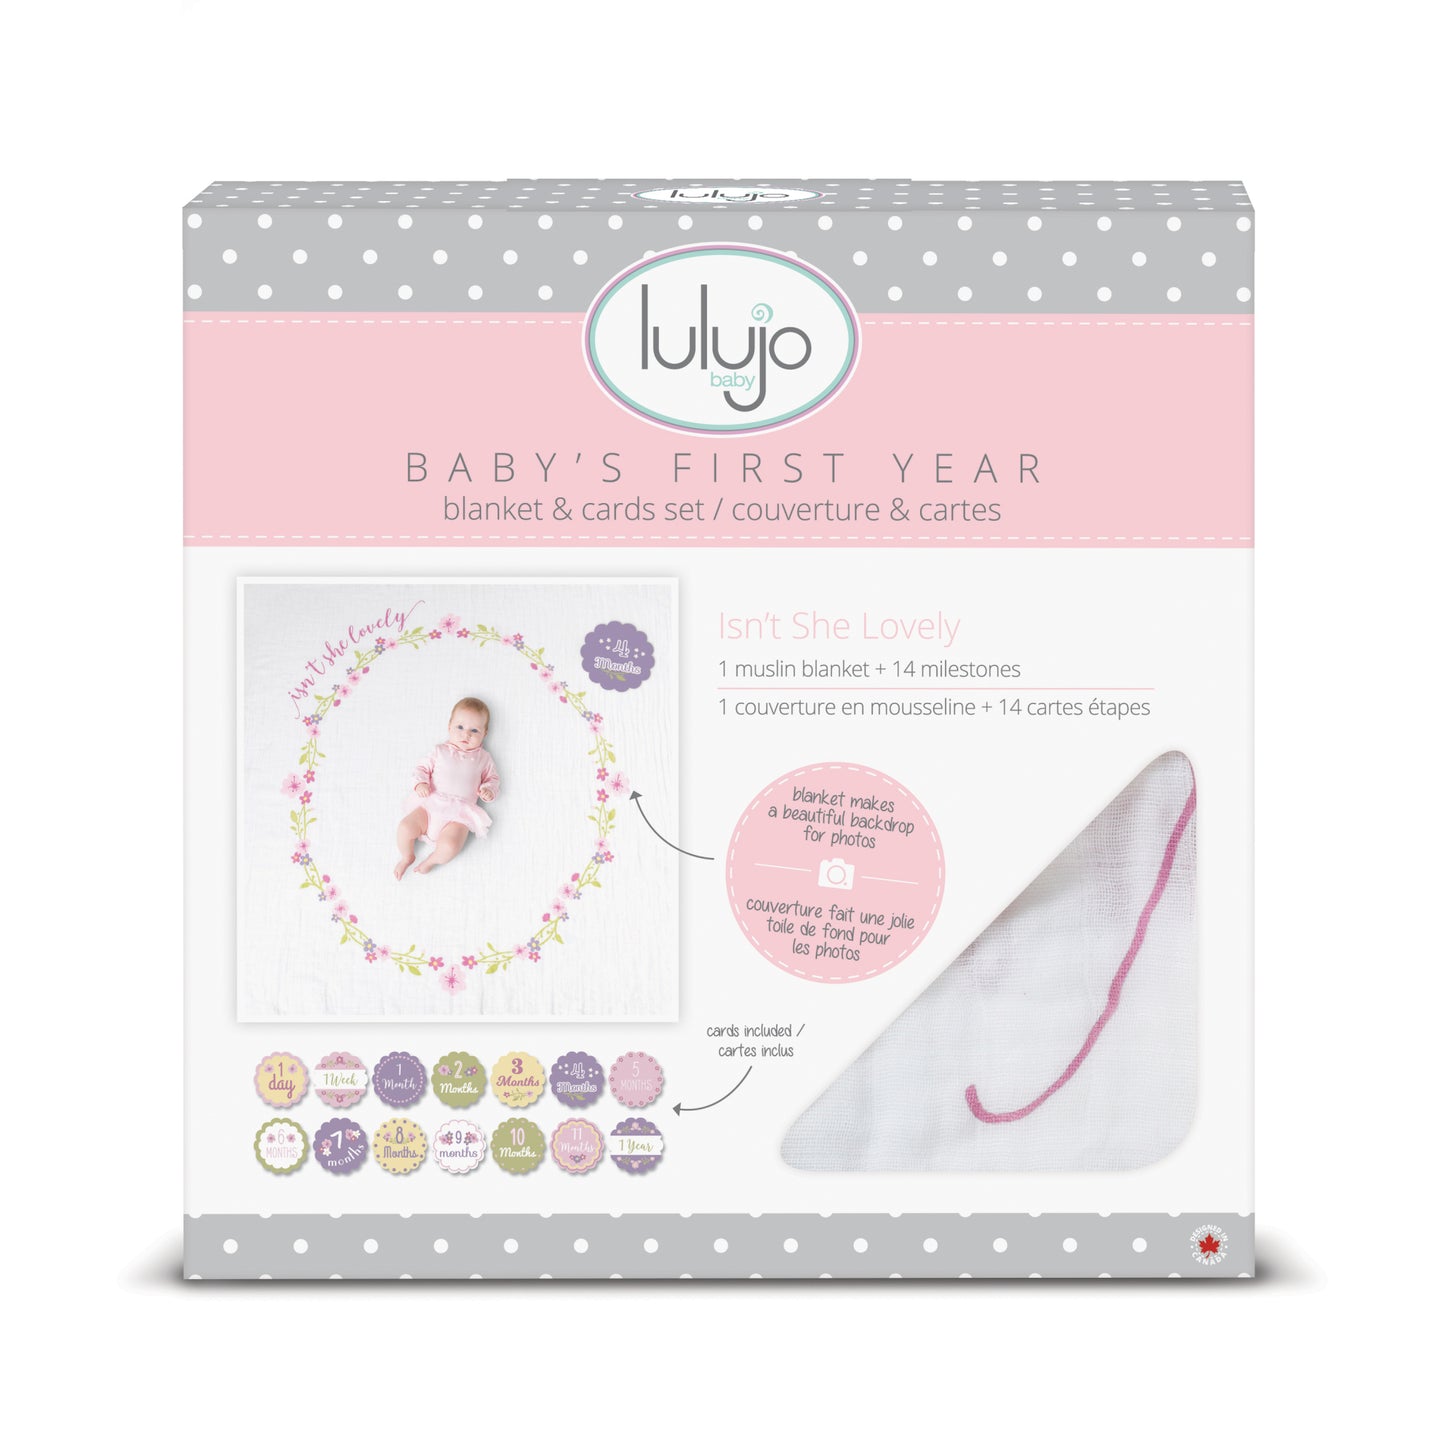 kidz-stuff-online - Lulujo Baby's First Year Blanket and Cards Set -  Isn't She Lovely